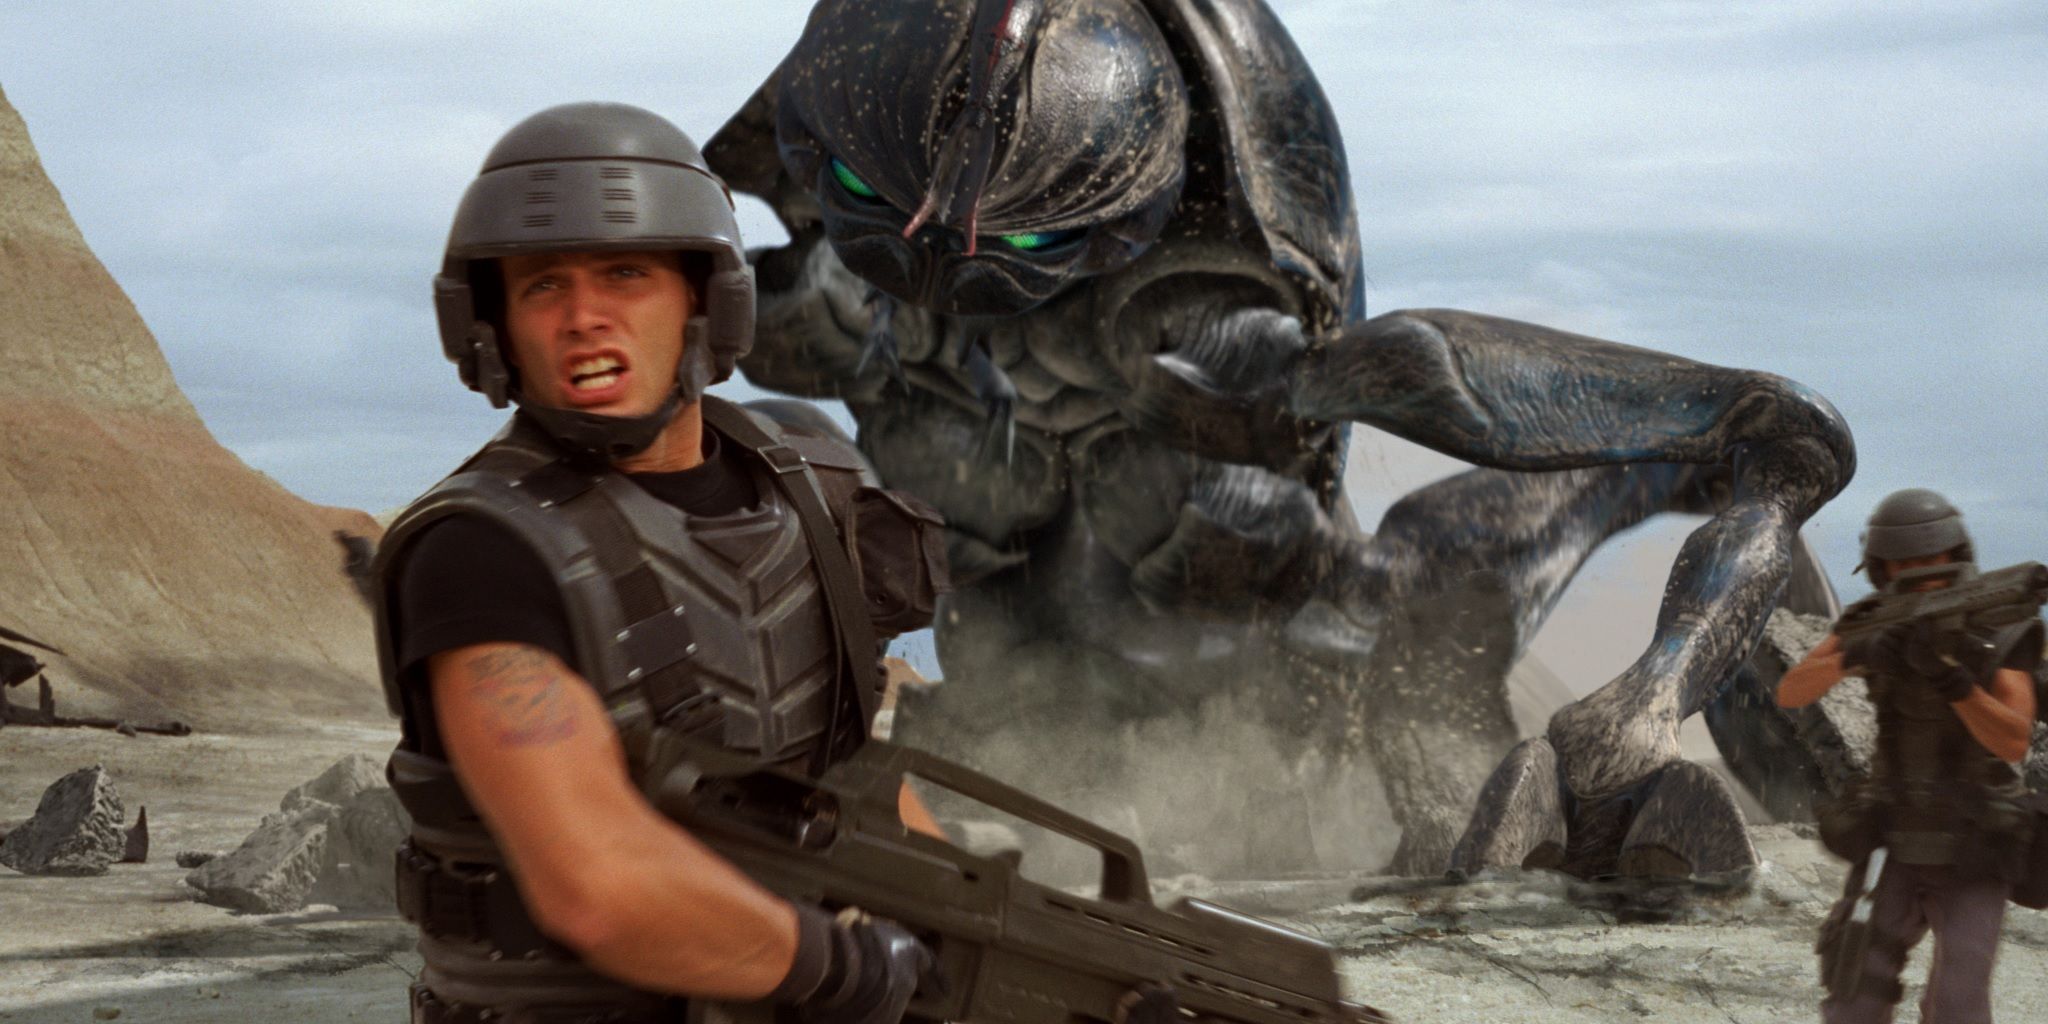 In Starship Troopers, soldiers fight giant bugs